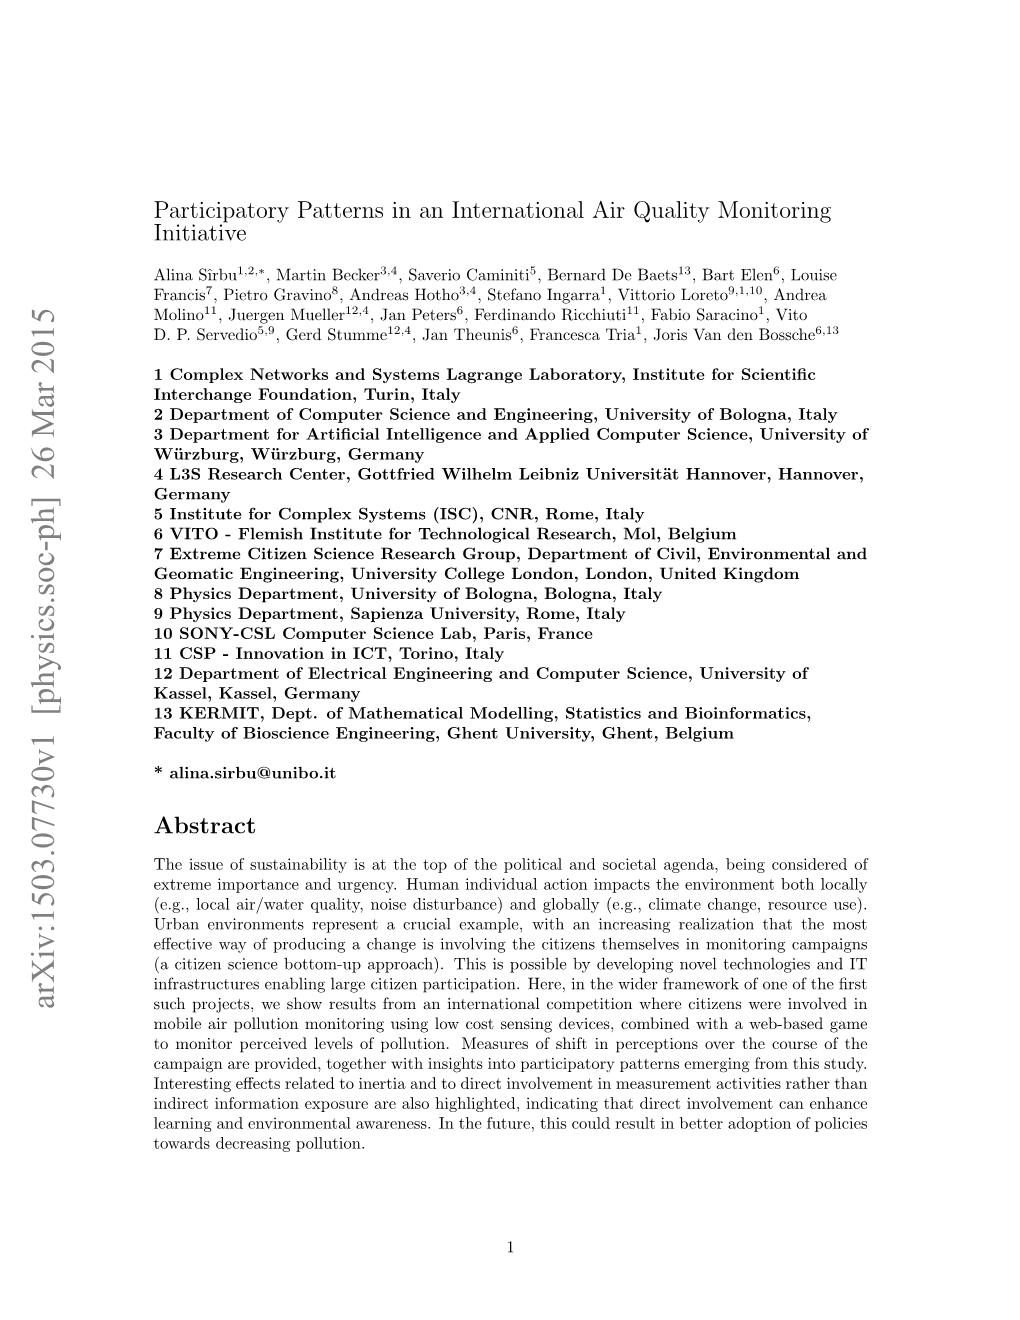 Participatory Patterns in an International Air Quality Monitoring Initiative